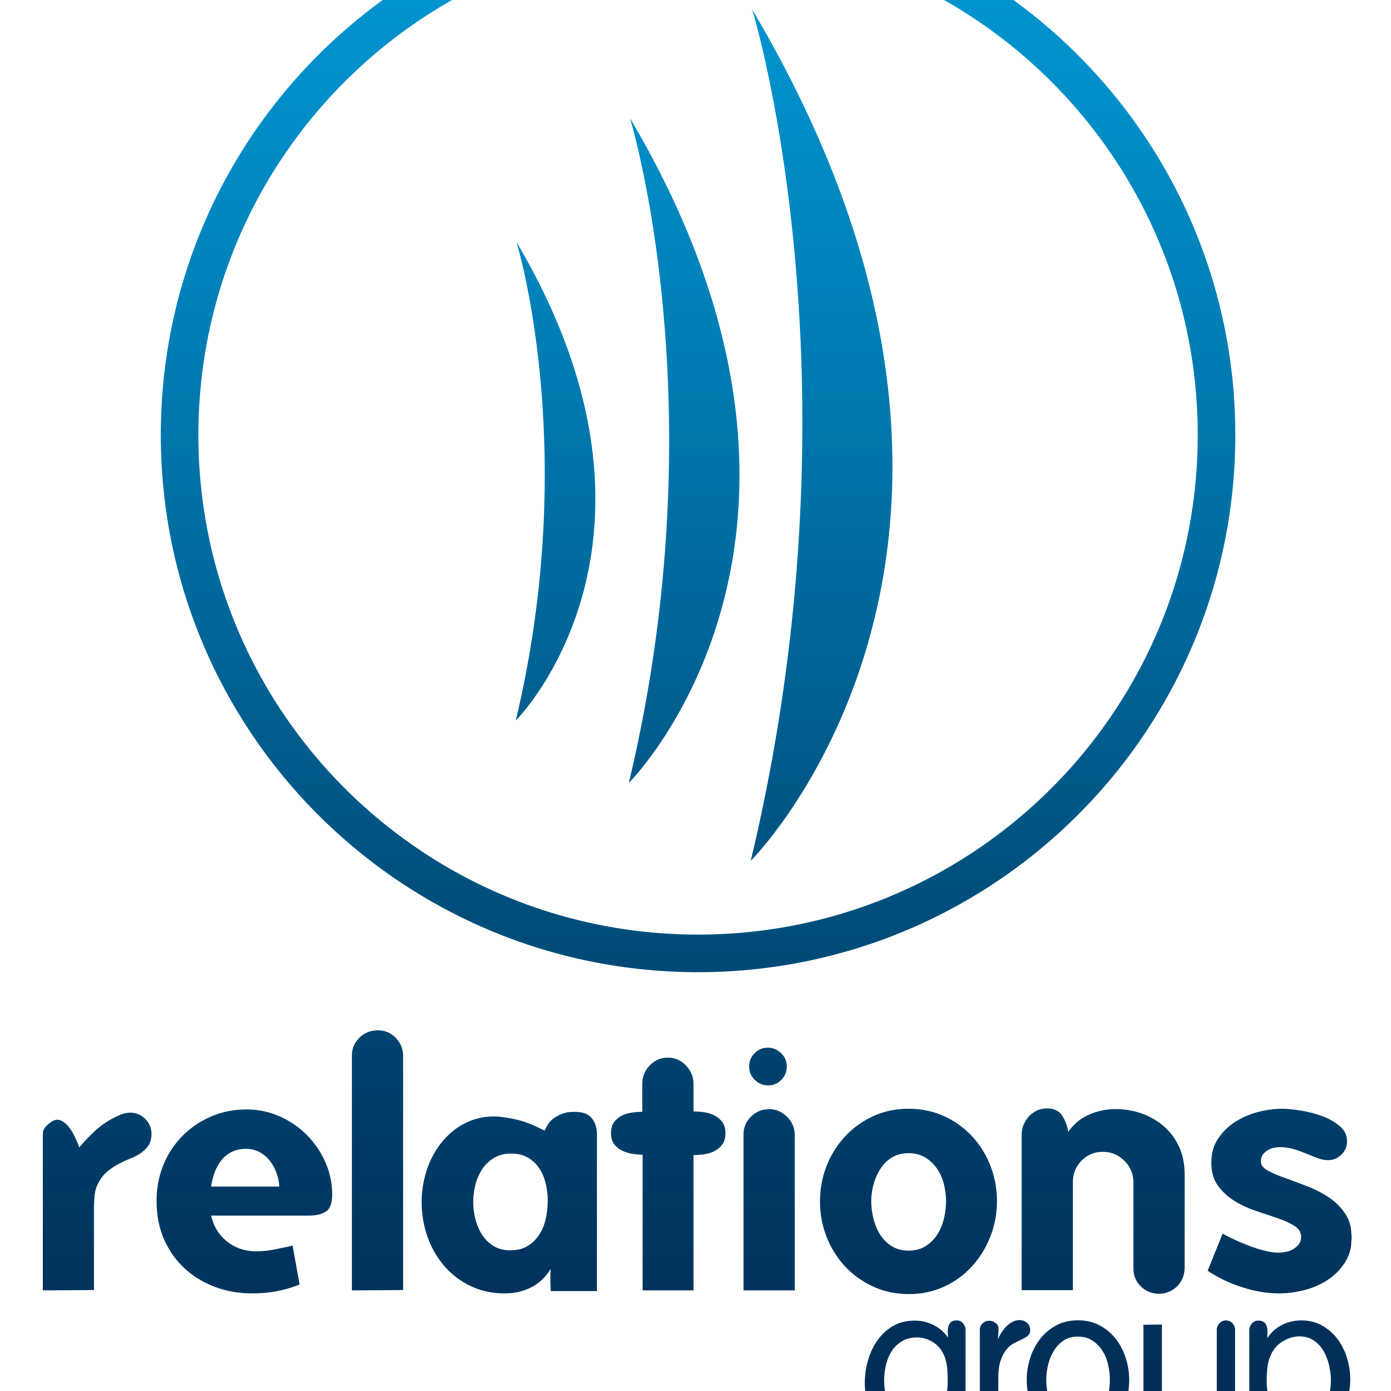 RelationsGroup